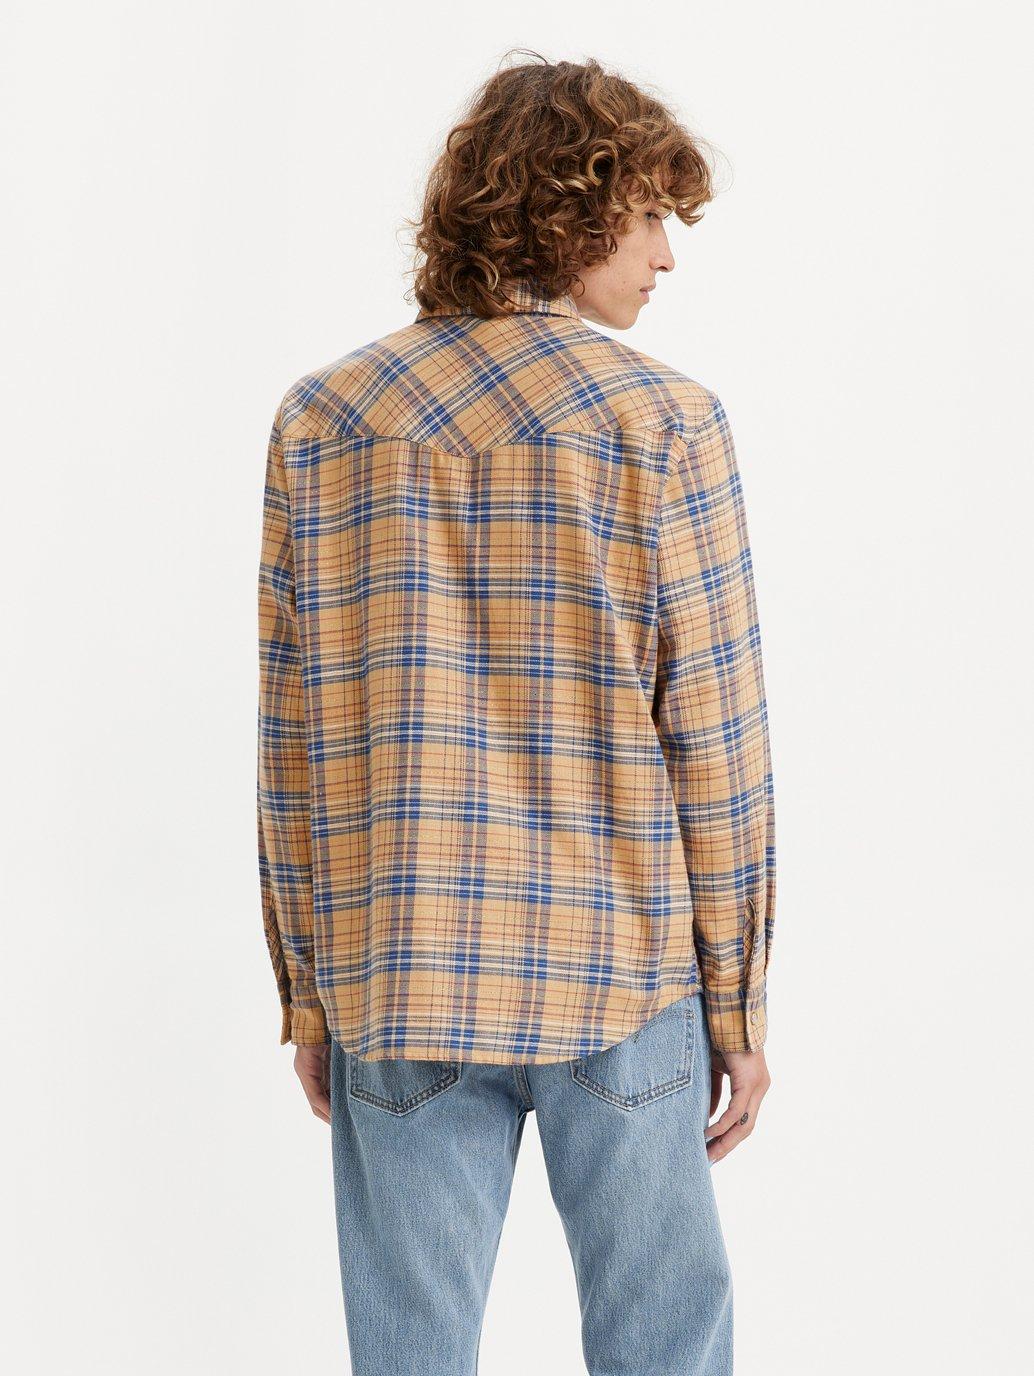 Buy Levi's® Men's Relaxed Fit Western Shirt | Levi's® Official